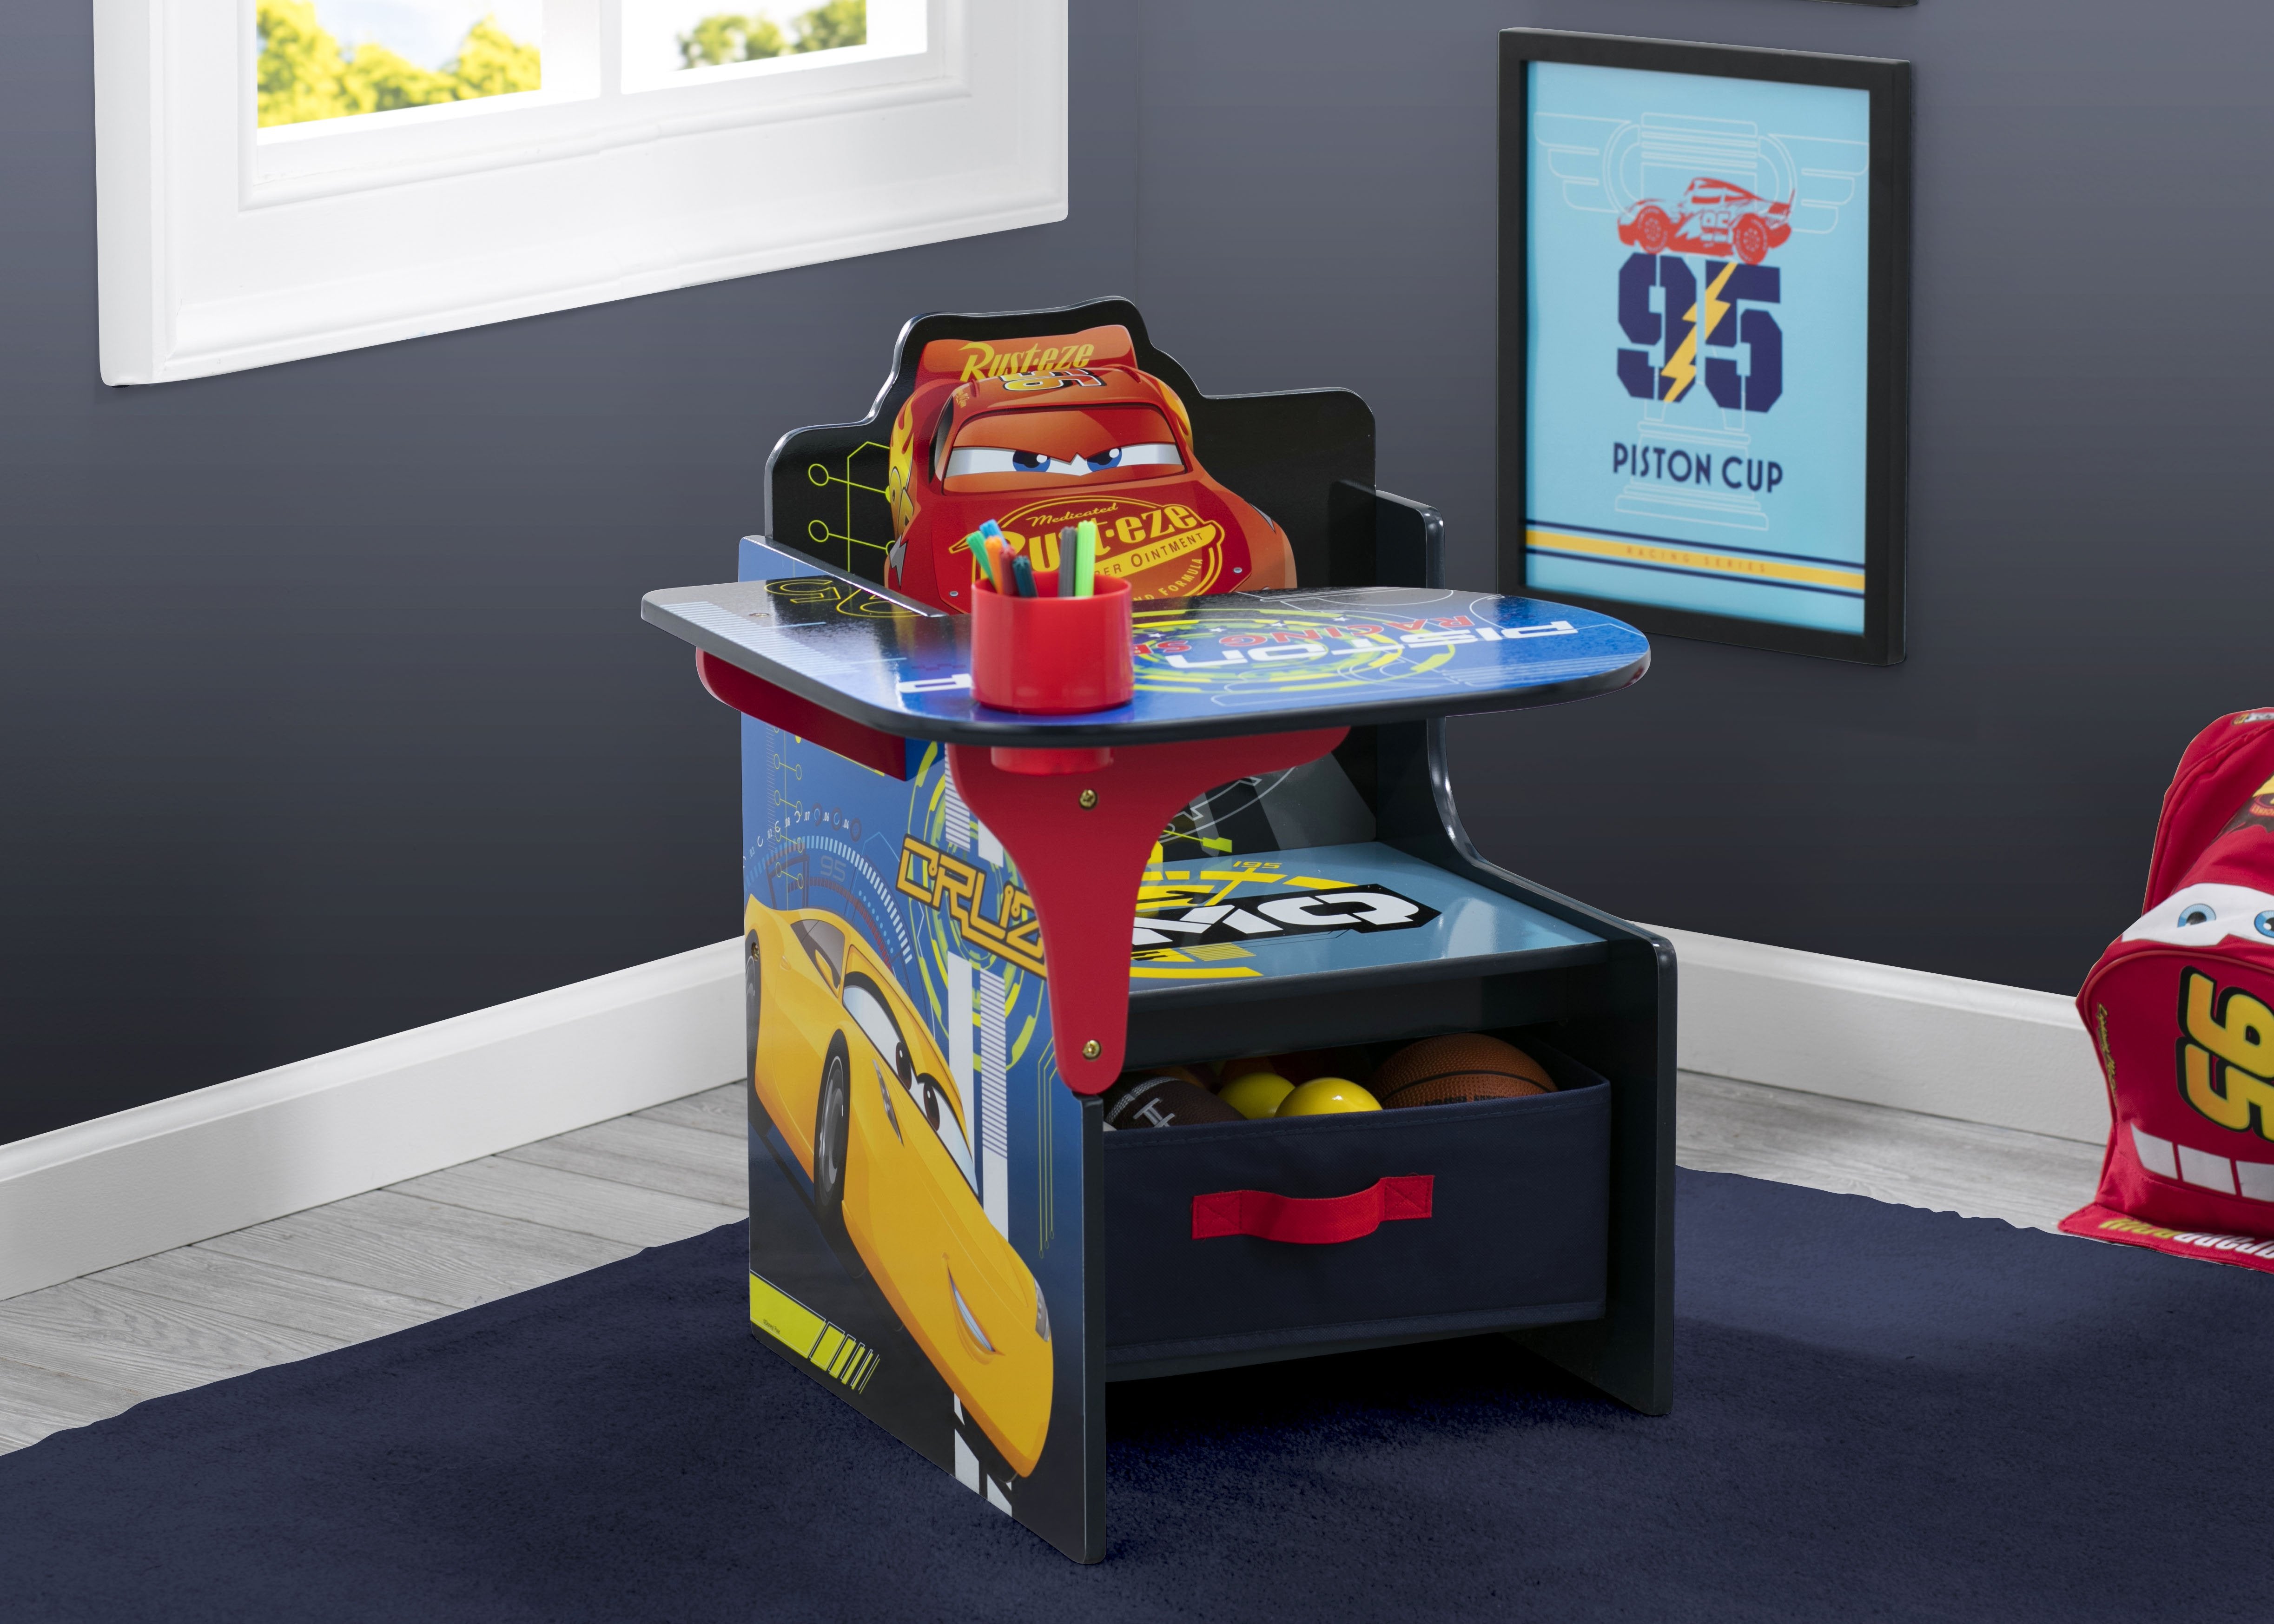 Delta Children Cars Lightning McQueen Toddler-to-twin Bed With Lights and  Toy for sale online